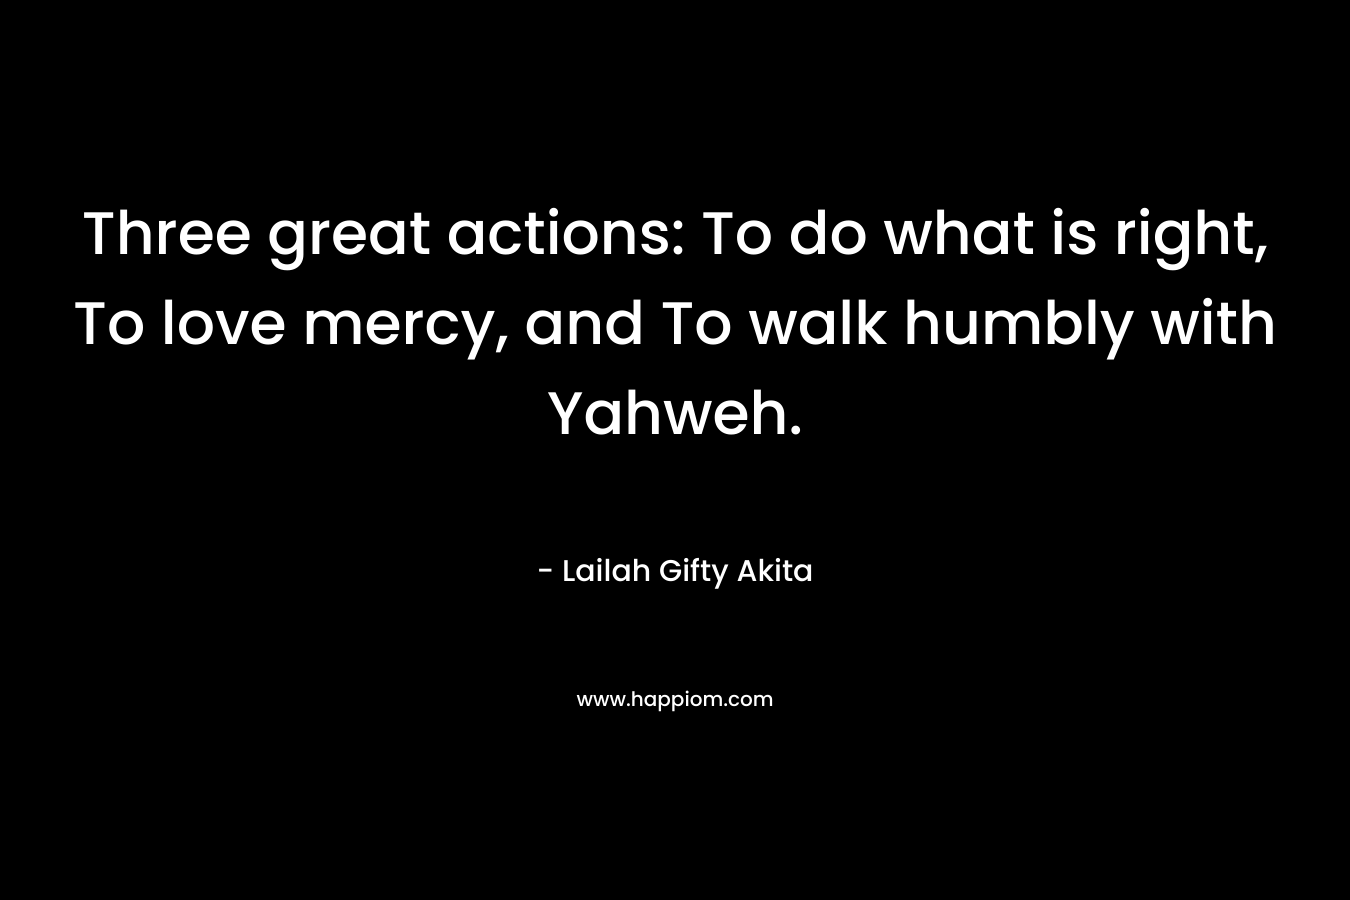 Three great actions: To do what is right, To love mercy, and To walk humbly with Yahweh.